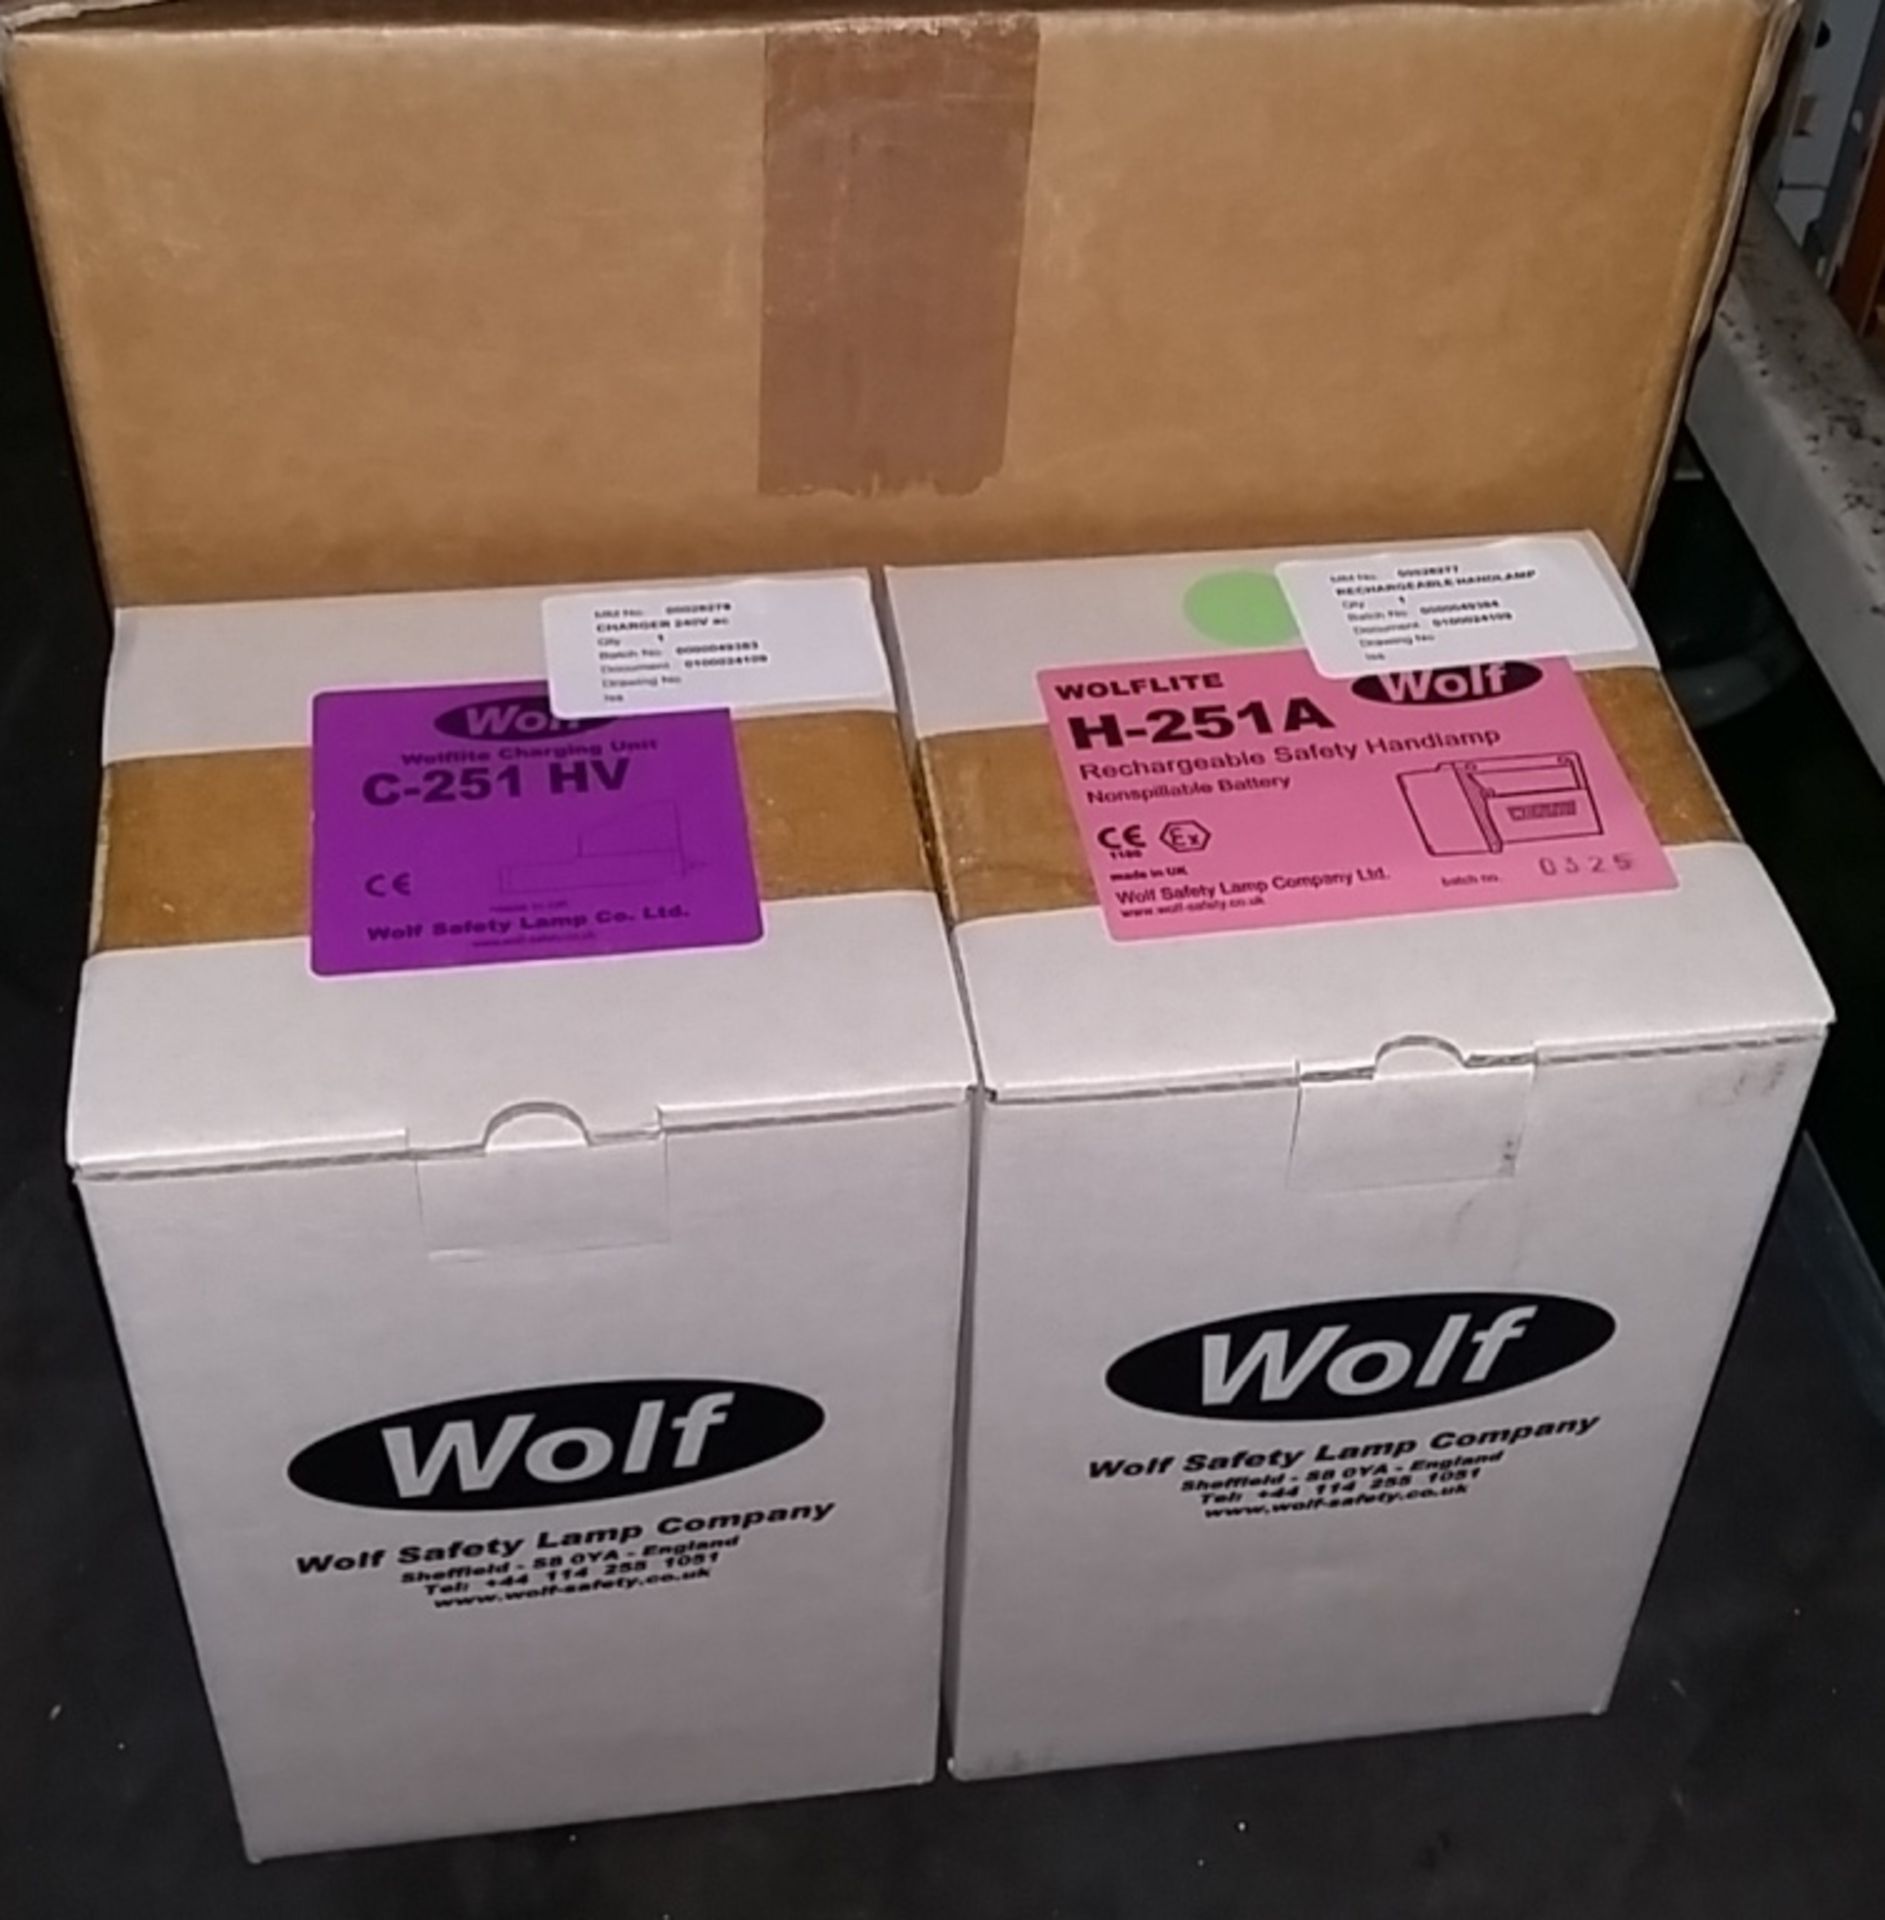 Wolf Wolflite rechargable hand lamp H-251A, Wolflite C-251 HV charging unit